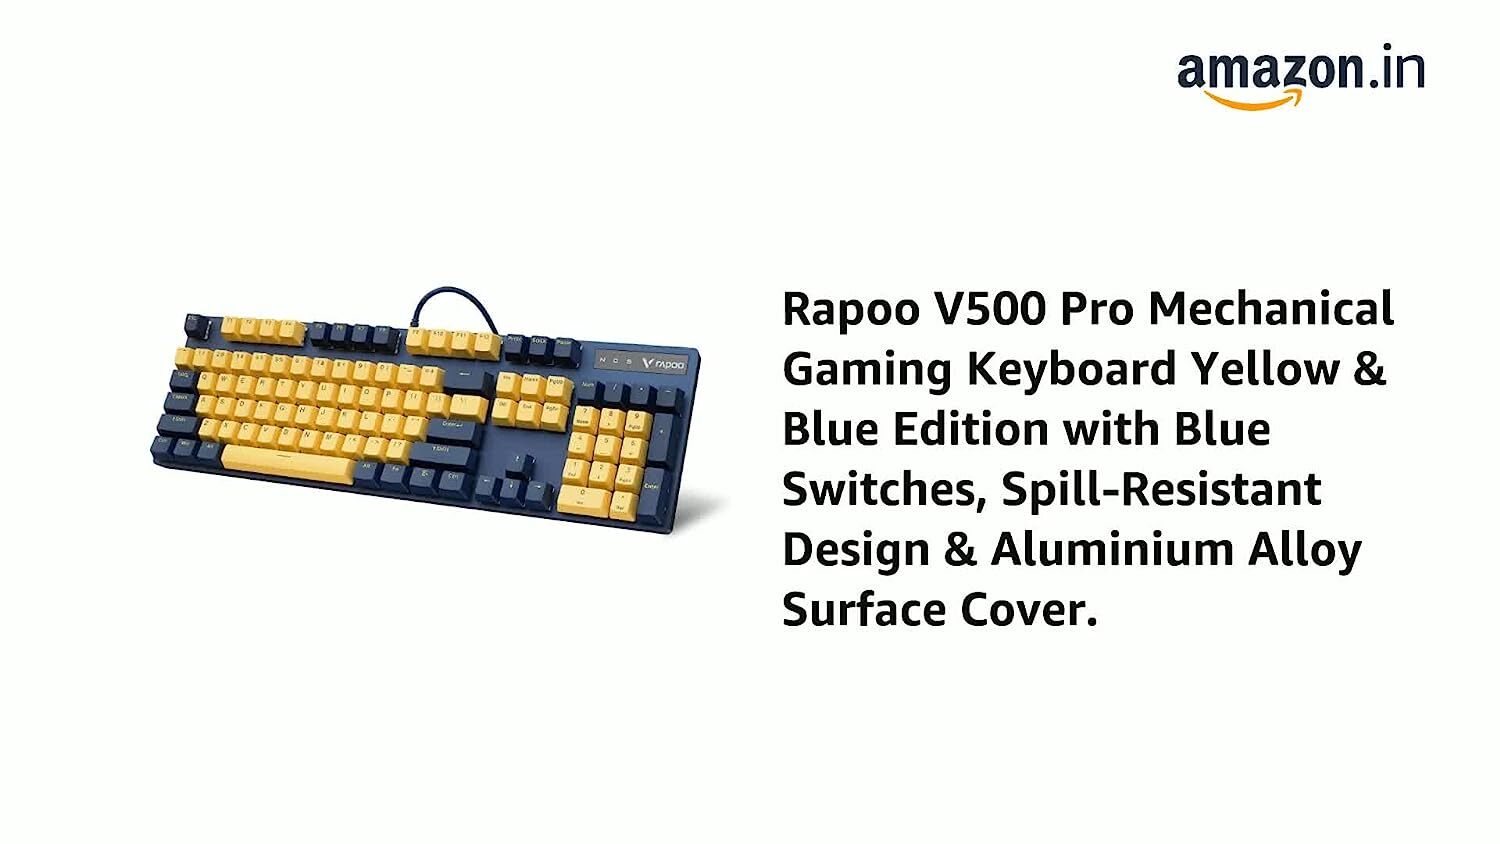 Rapoo V500 Pro Mechanical Gaming Keyboard Yellow & Blue Edition with Blue Switches, Spill-Resistant Design & Aluminium Alloy Surface Cover.